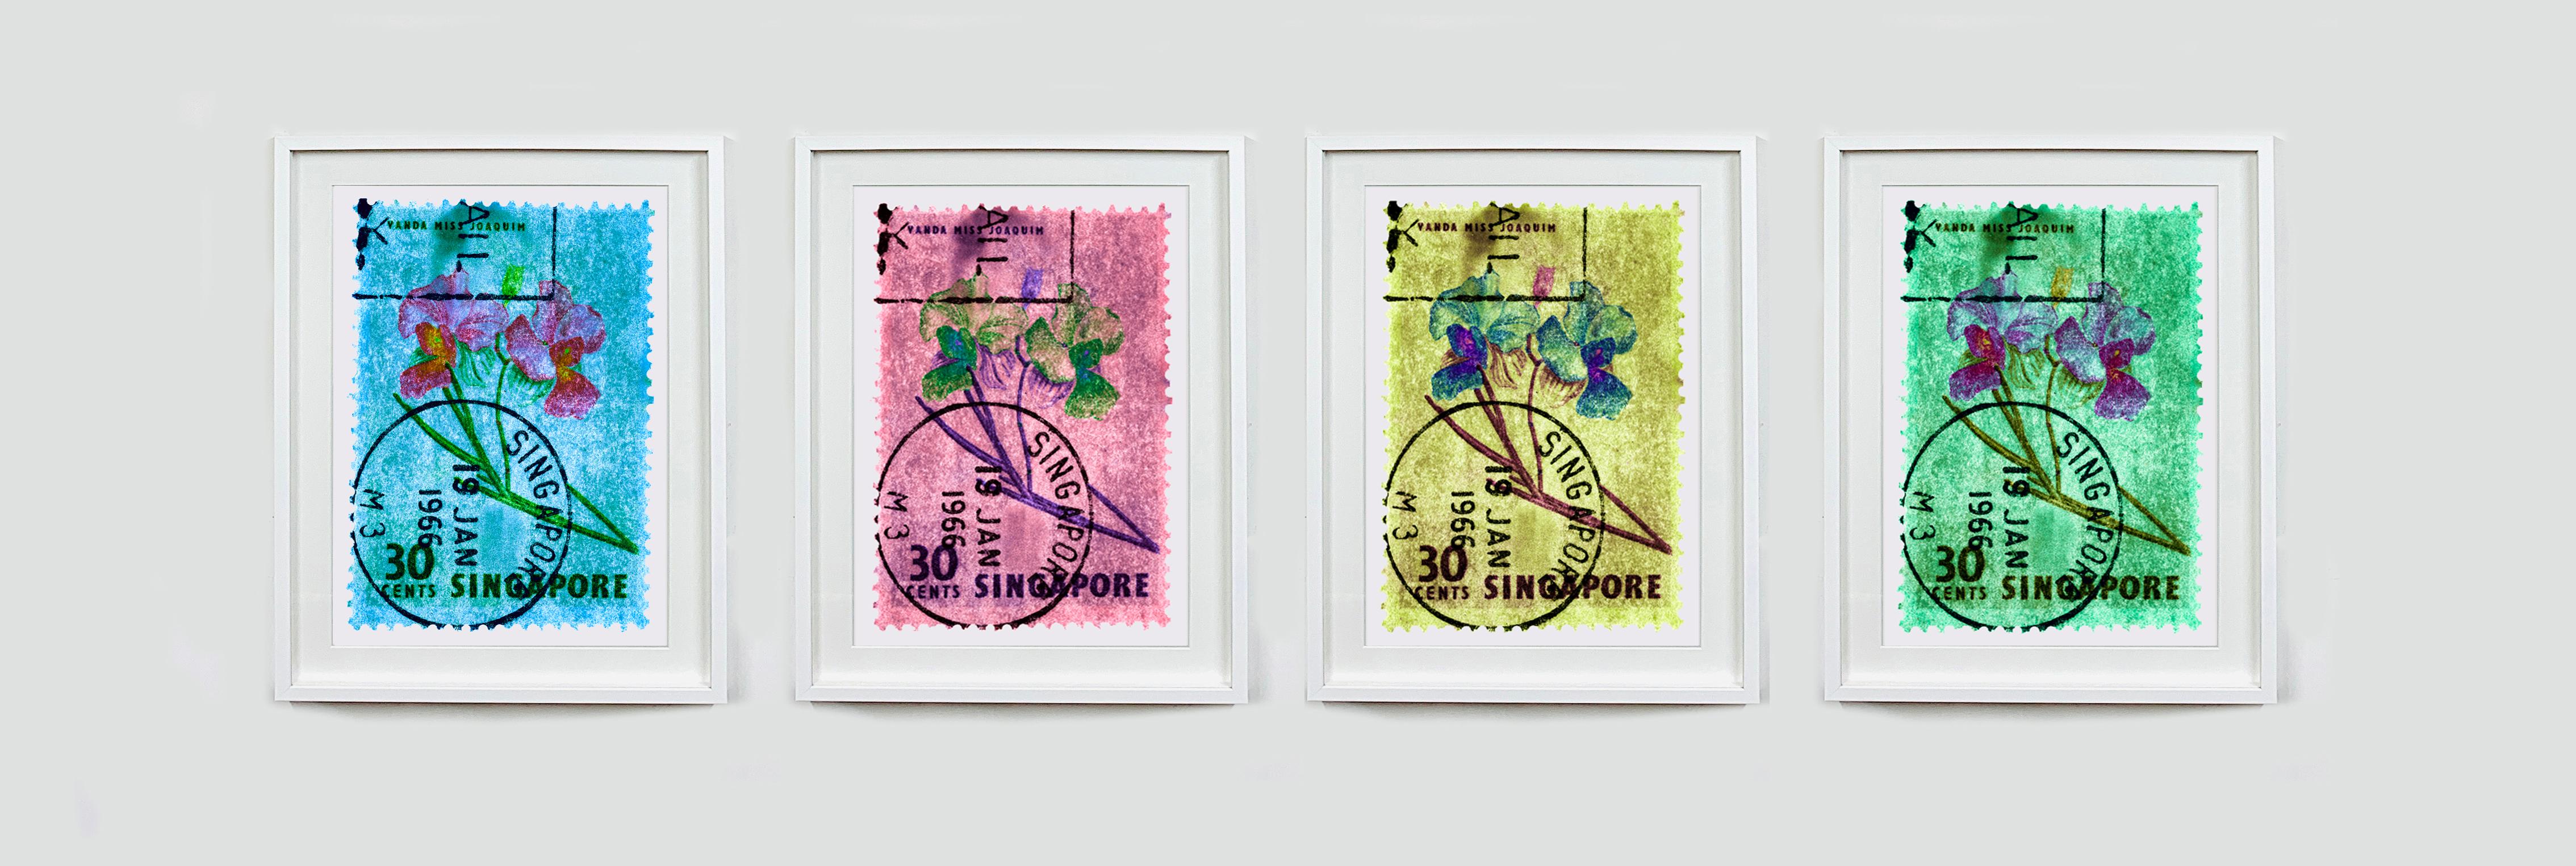 Singapore Stamp Collection, 30c Singapore Orchid Yellow - Floral color photo - Conceptual Photograph by Heidler & Heeps